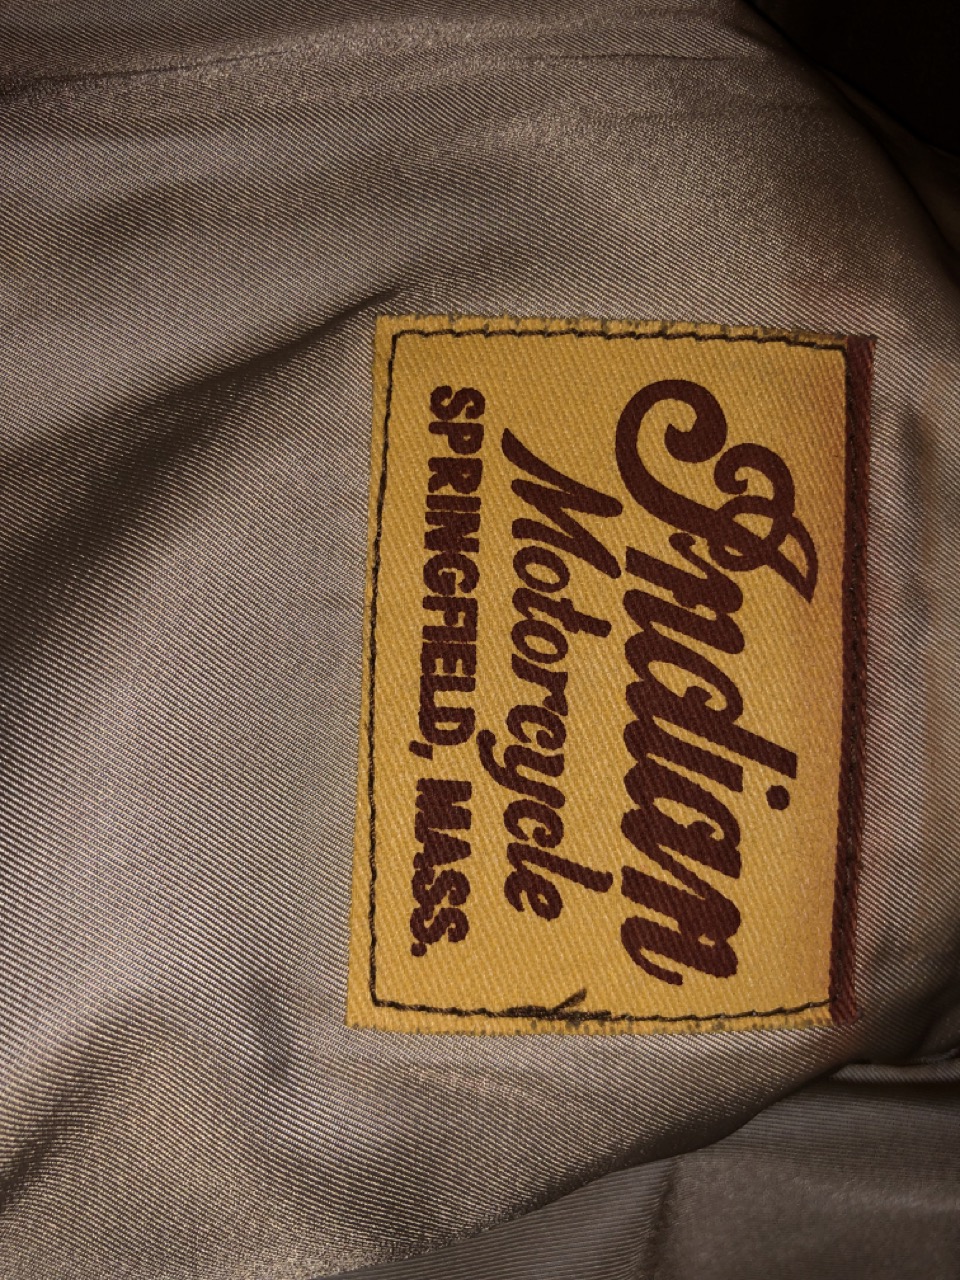 Authentic Indian Motorcycles Jacket? | Vintage Leather Jackets Forum